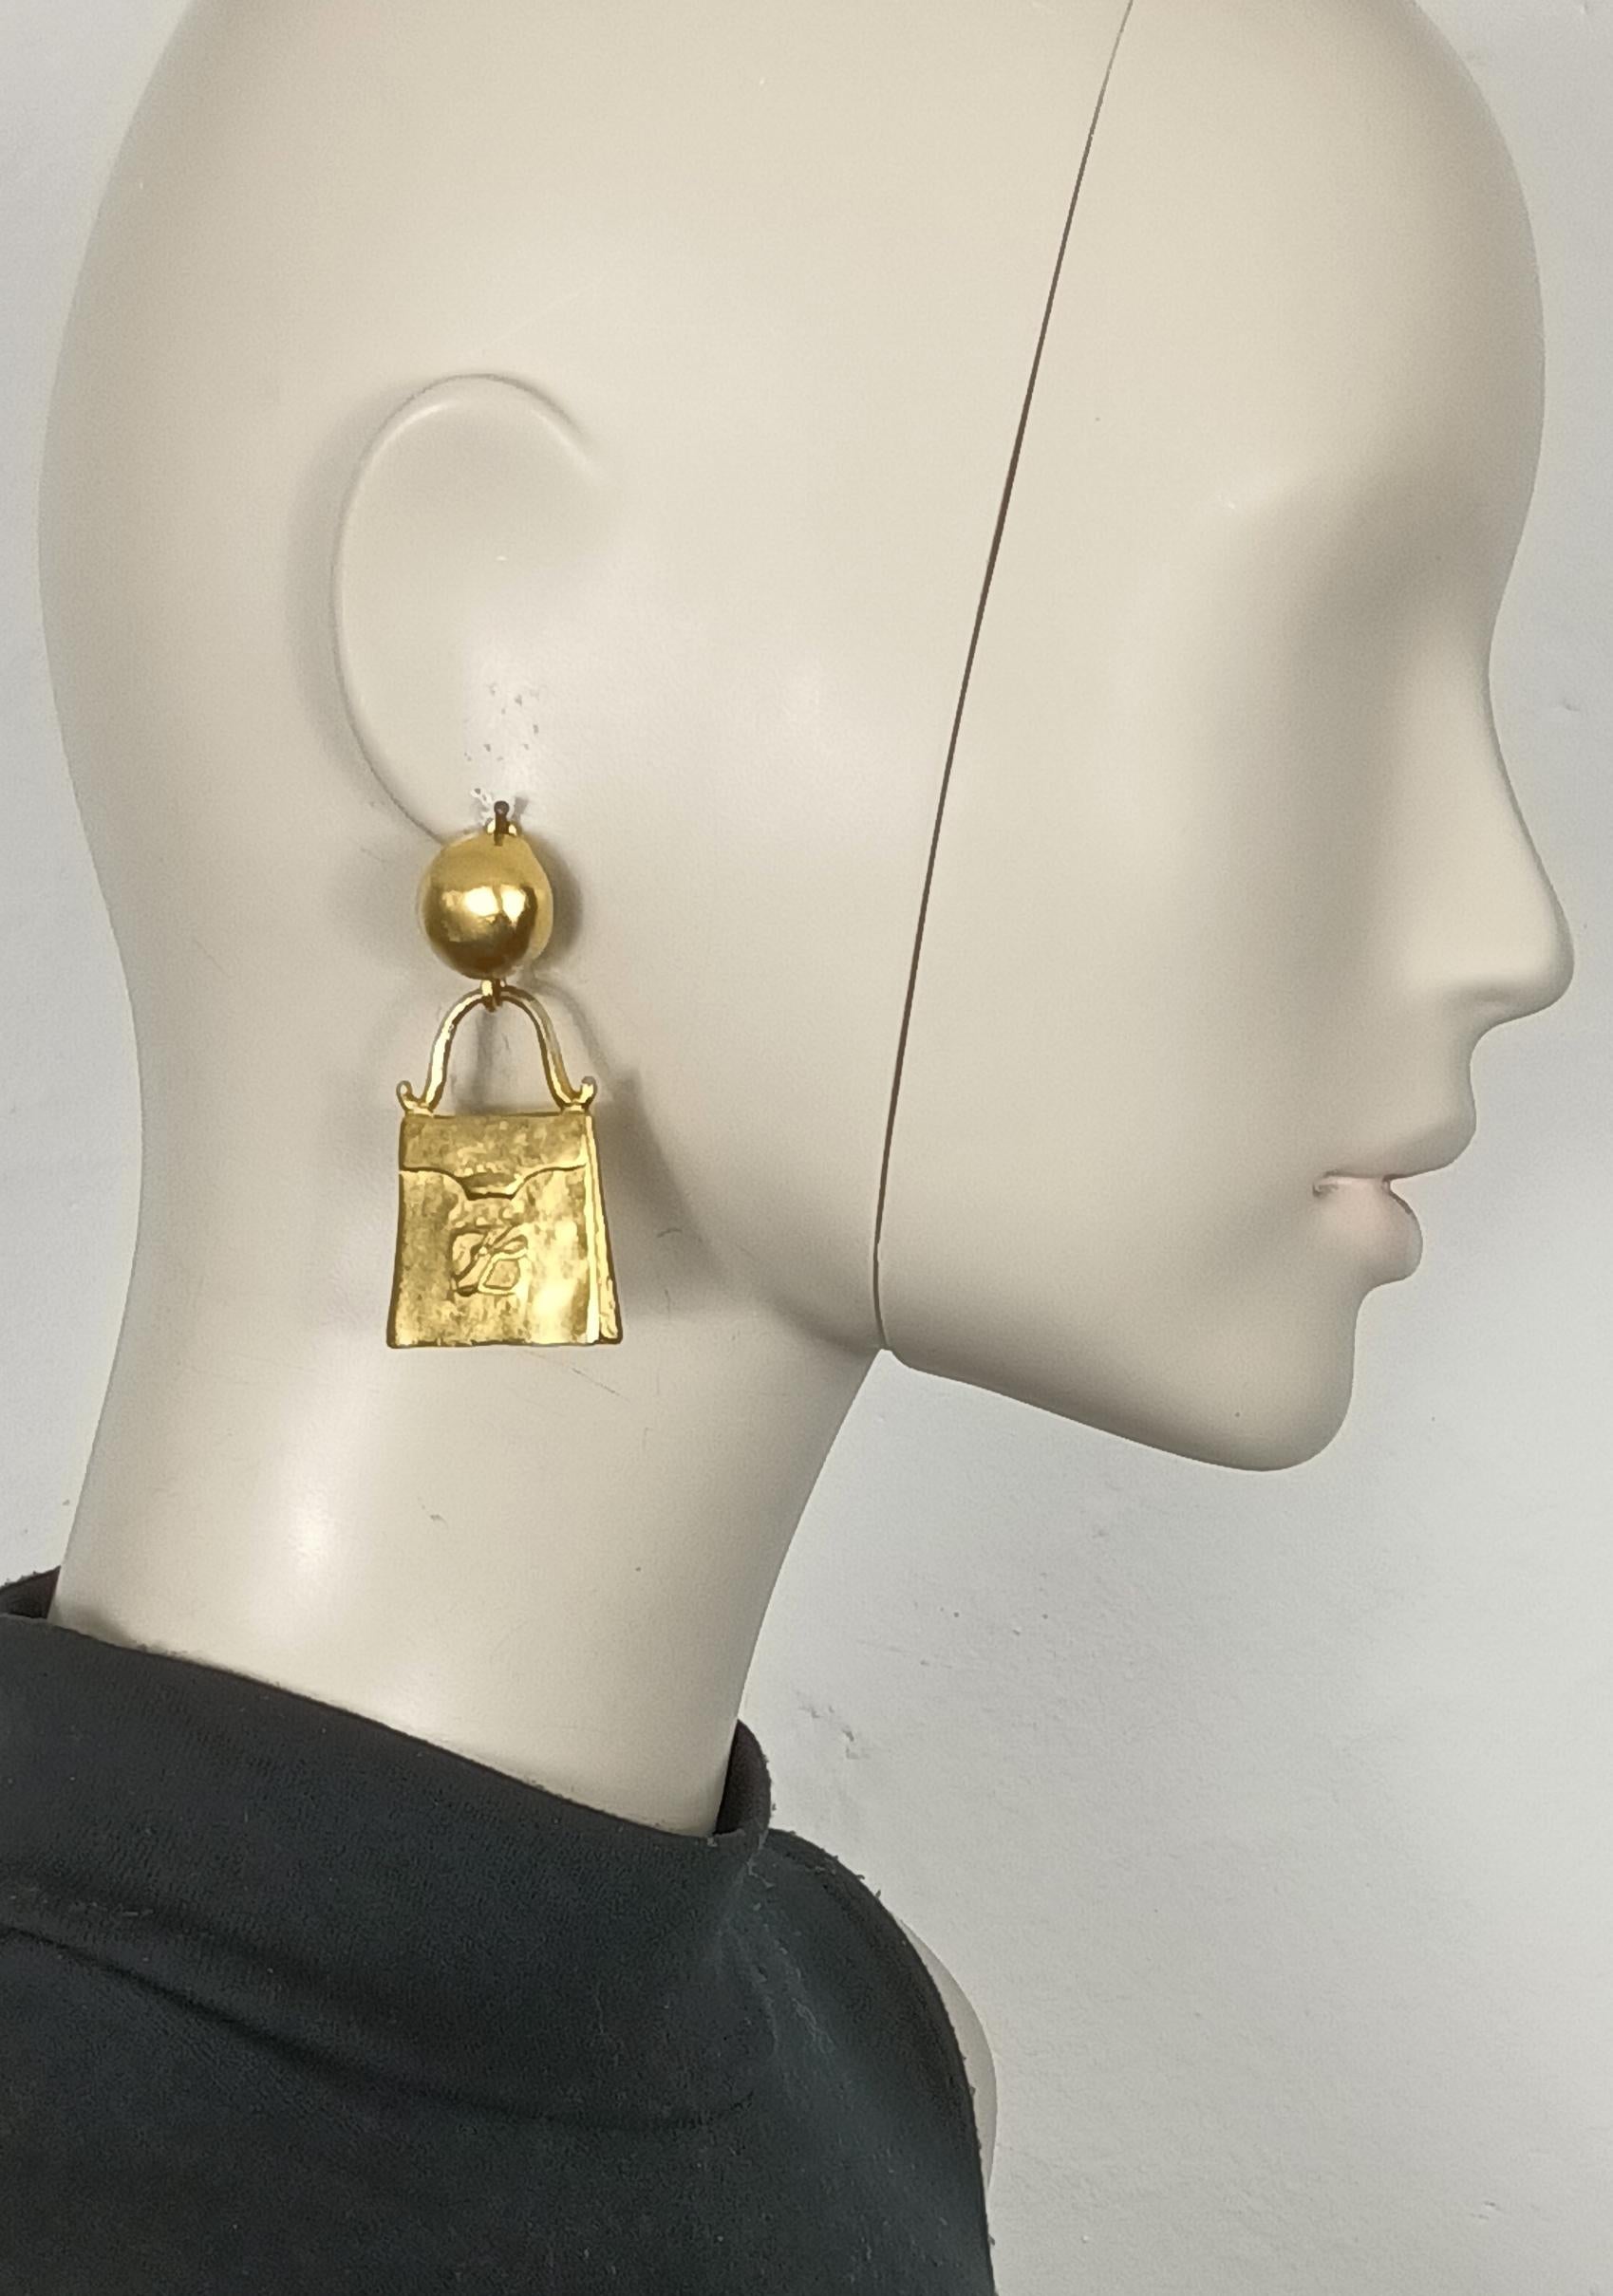 KARL LAGERFELD vintage gold tone novelty dangling earrings (clip-on) featuring a bag with KL logo.

Embossed KL on the reverse sides.

Indicative measurements : height approx. 5.7 cm (2.24 inches) / max. width approx. 2.8 cm (1.10 inches).

Weight